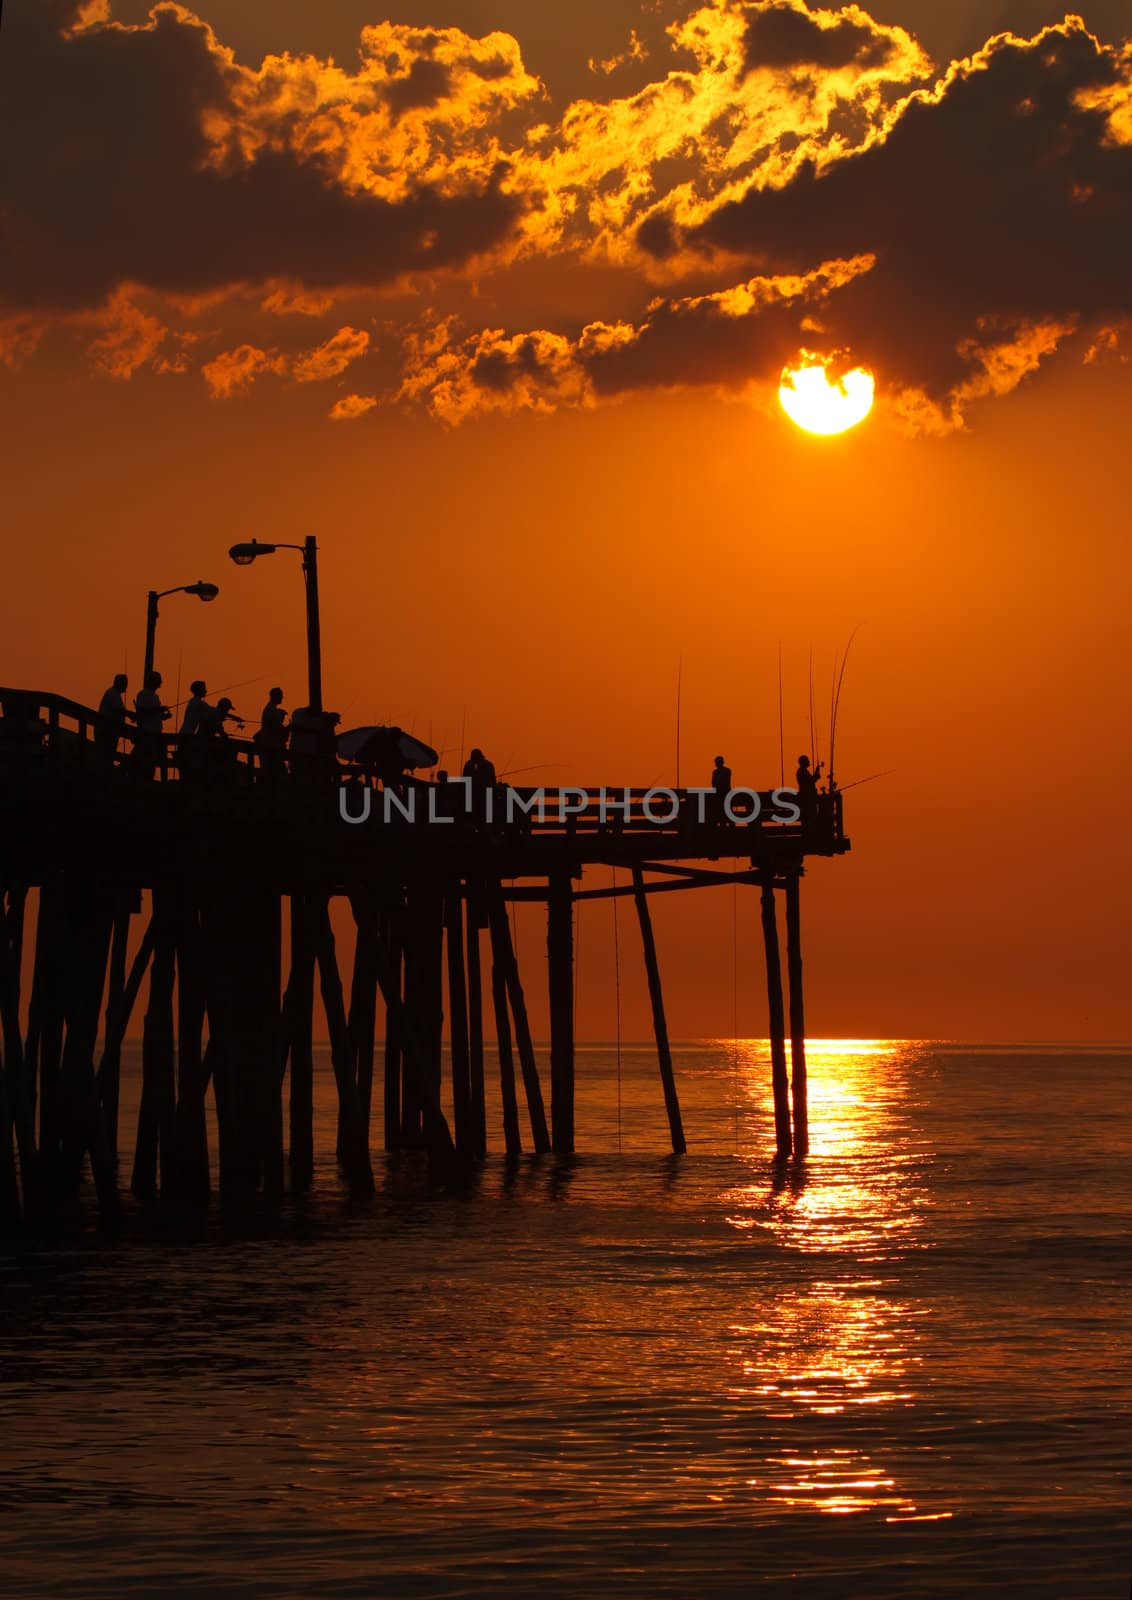 Early-morning anglers are silhouetted against the rising sun on a fishing pier in Nags Head, North Carolina vertical